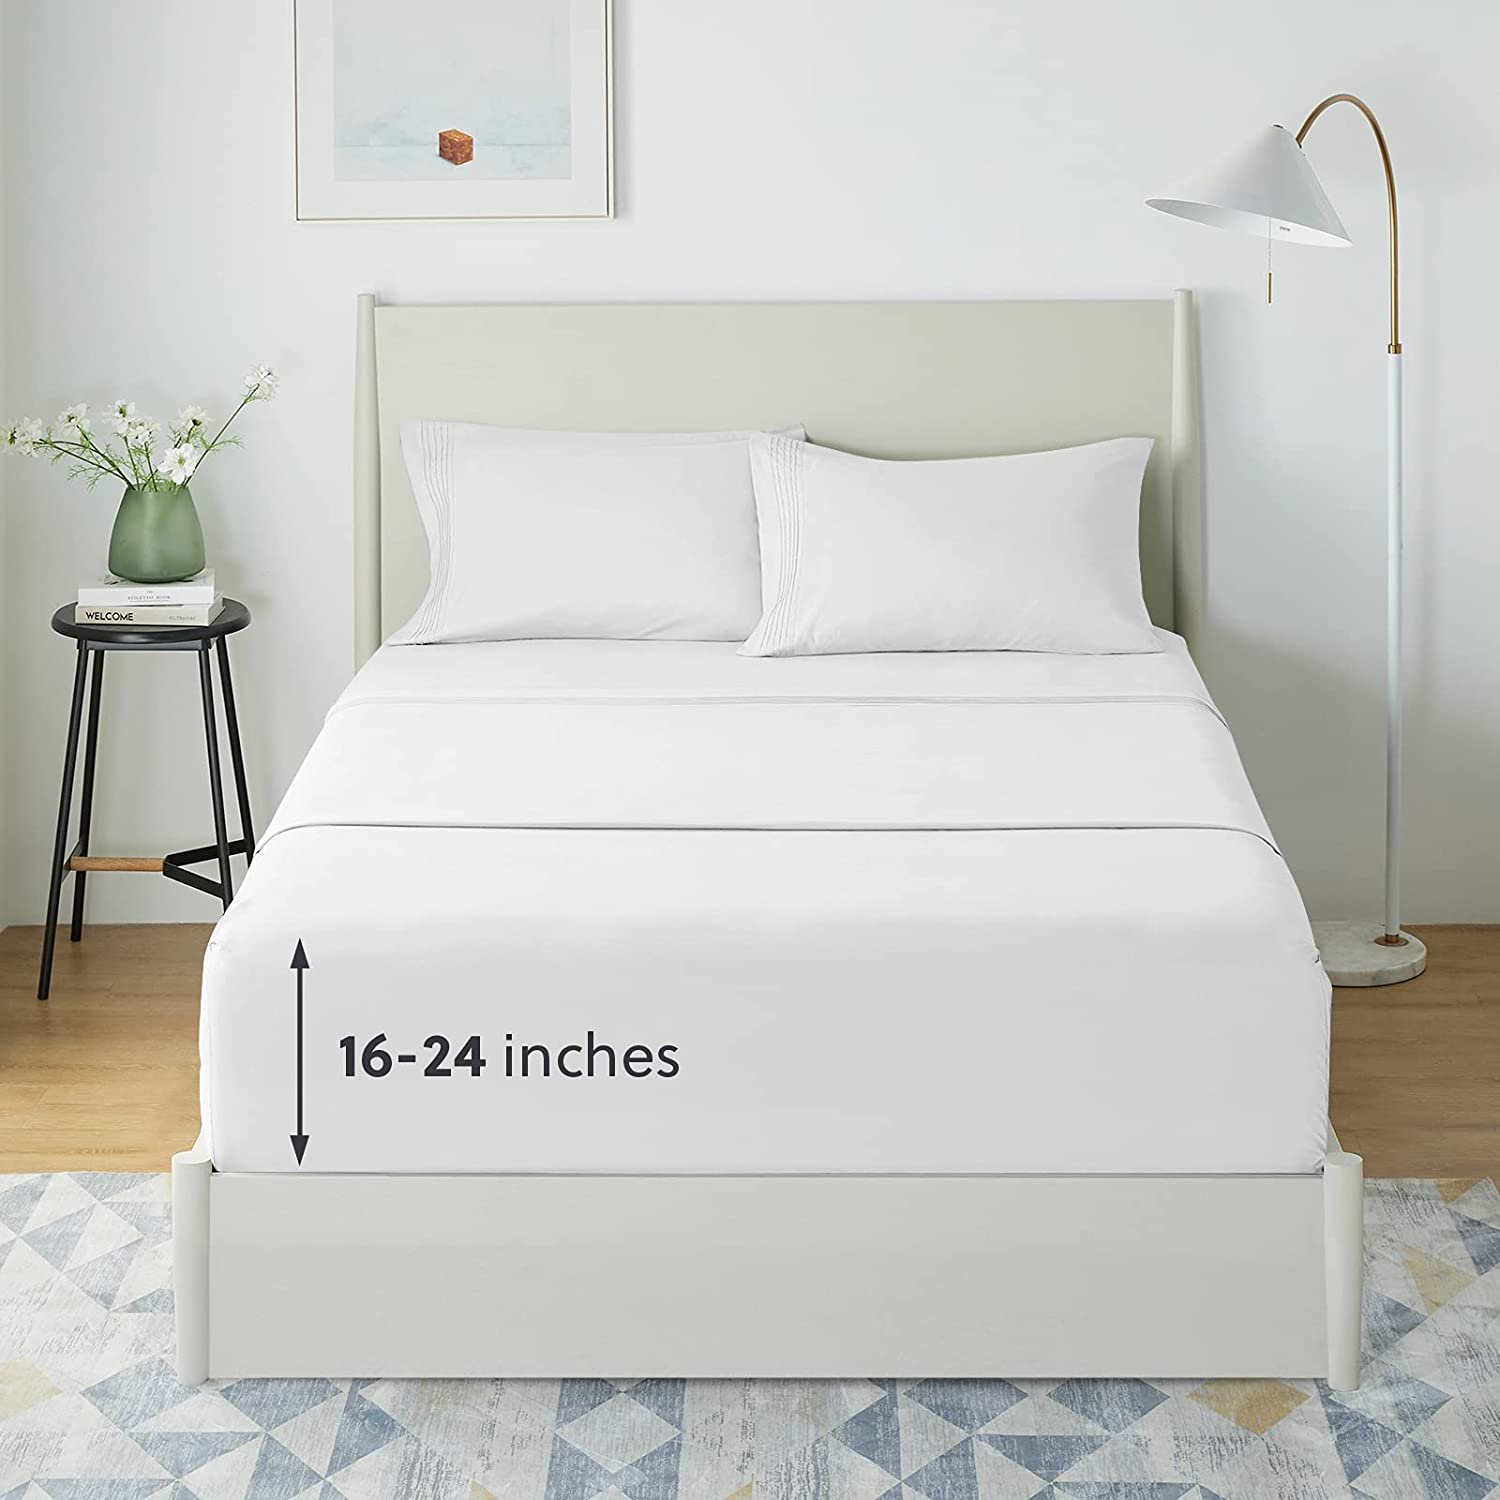 Queen Size Sheet Sets - Extra Deep Pocket Sheet Sets Moisture Wicking, 4  Pieces Sheet Set, Light Grey, Breathable & Cooling Bed Sheets, Easily Fits  Extra Deep Mattress 16-24 inches | Walmart Canada